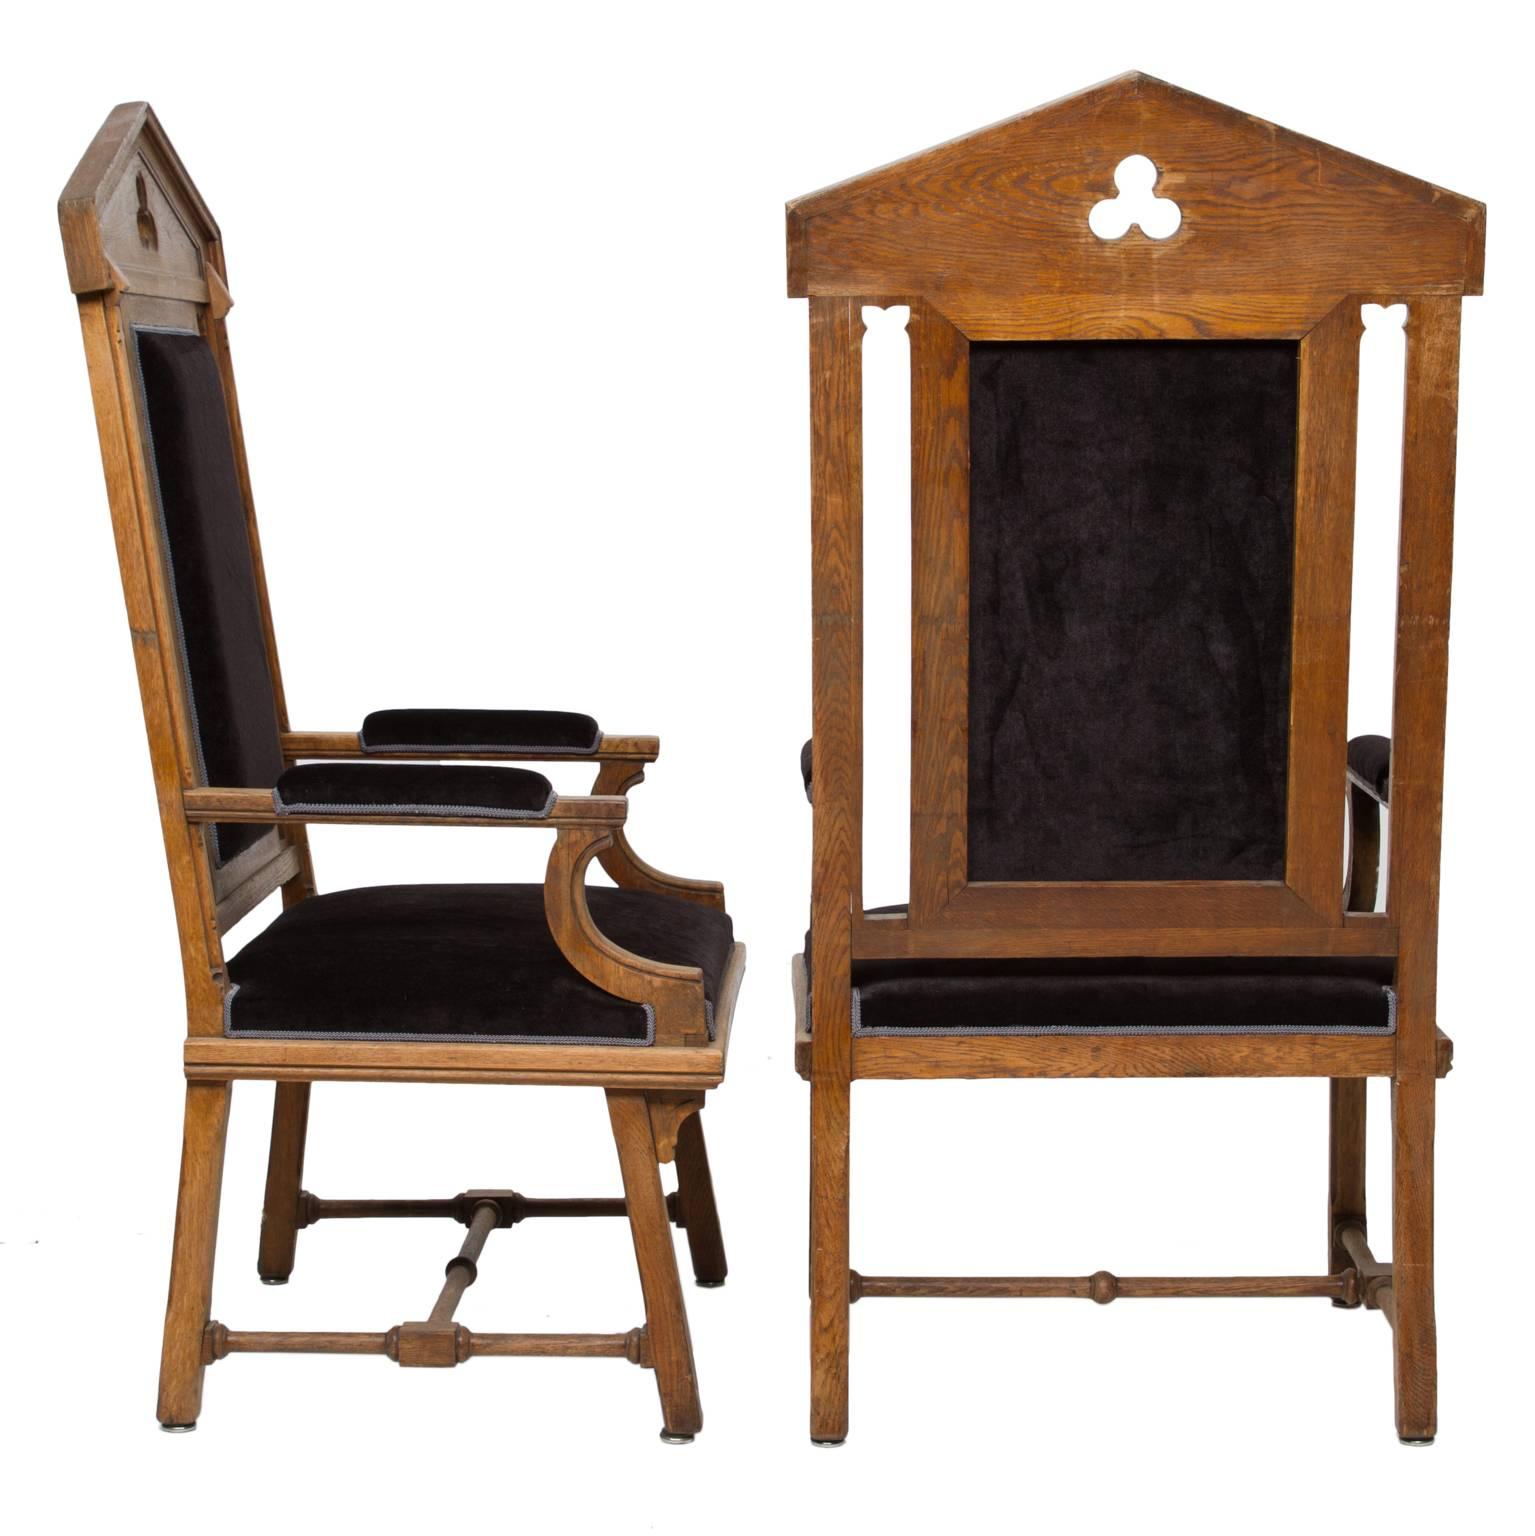 Vintage Moorish style large armchairs
A fantastic and unusual pair of armchairs is a Moorish style. Made of quality oak wood and finished with a wax based finish. Recently reupholstered in a black velvet. The scale of these chairs would be